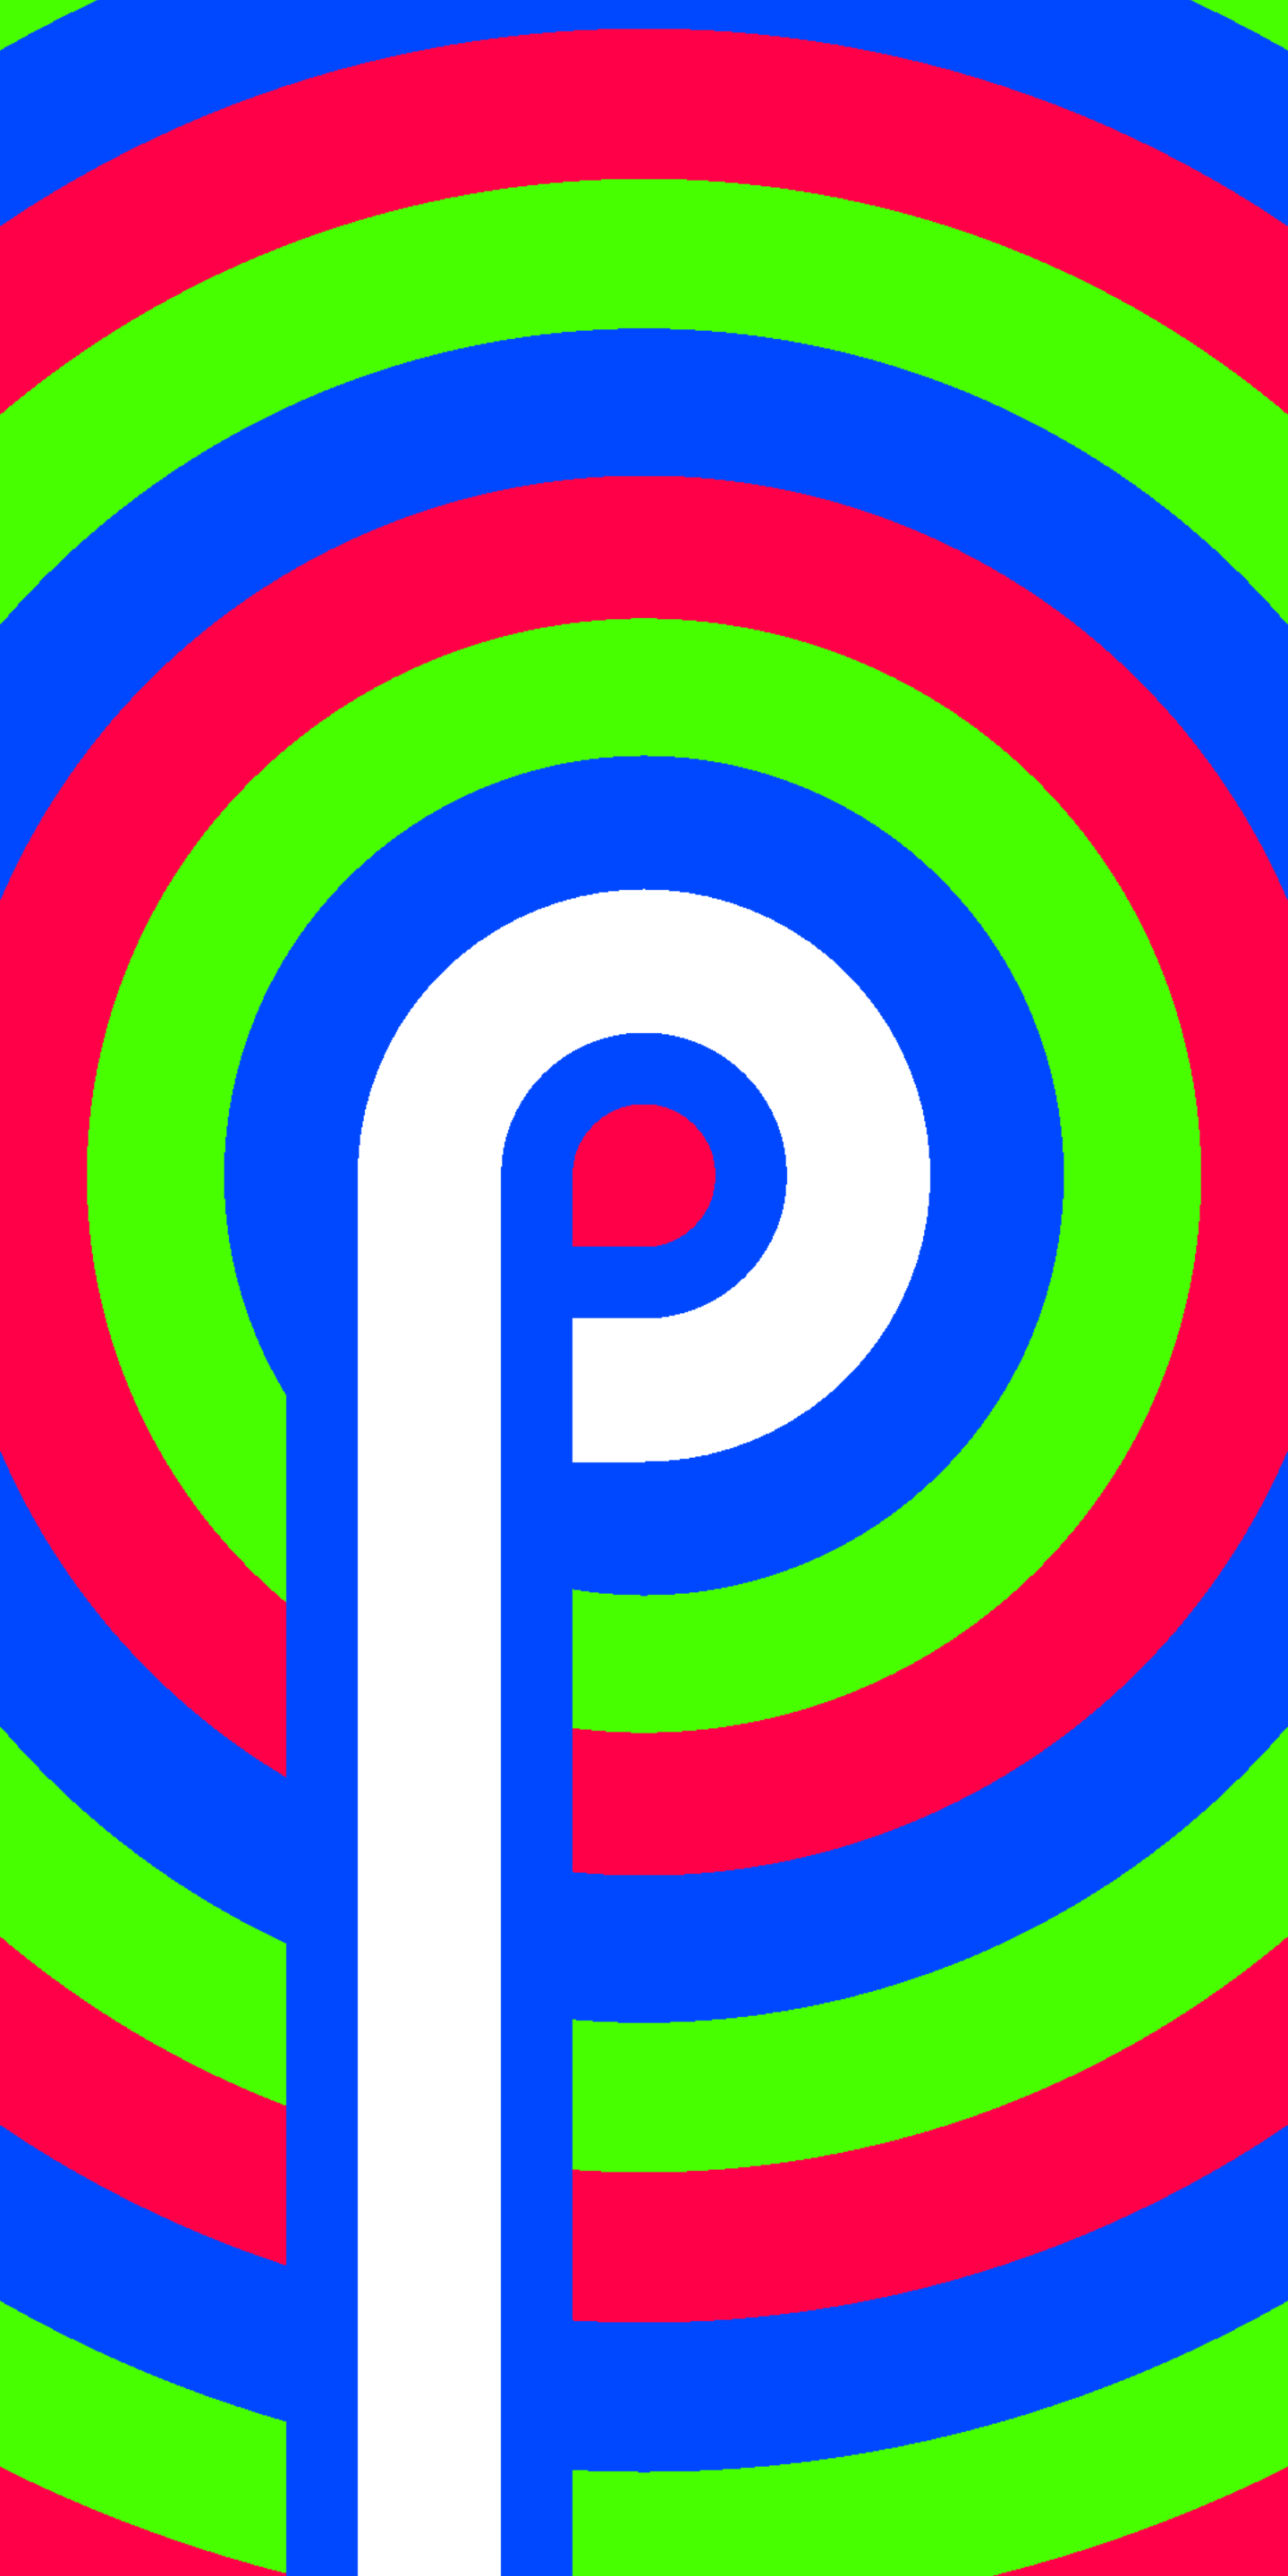 File:Android Pie.PNG - Wikipedia